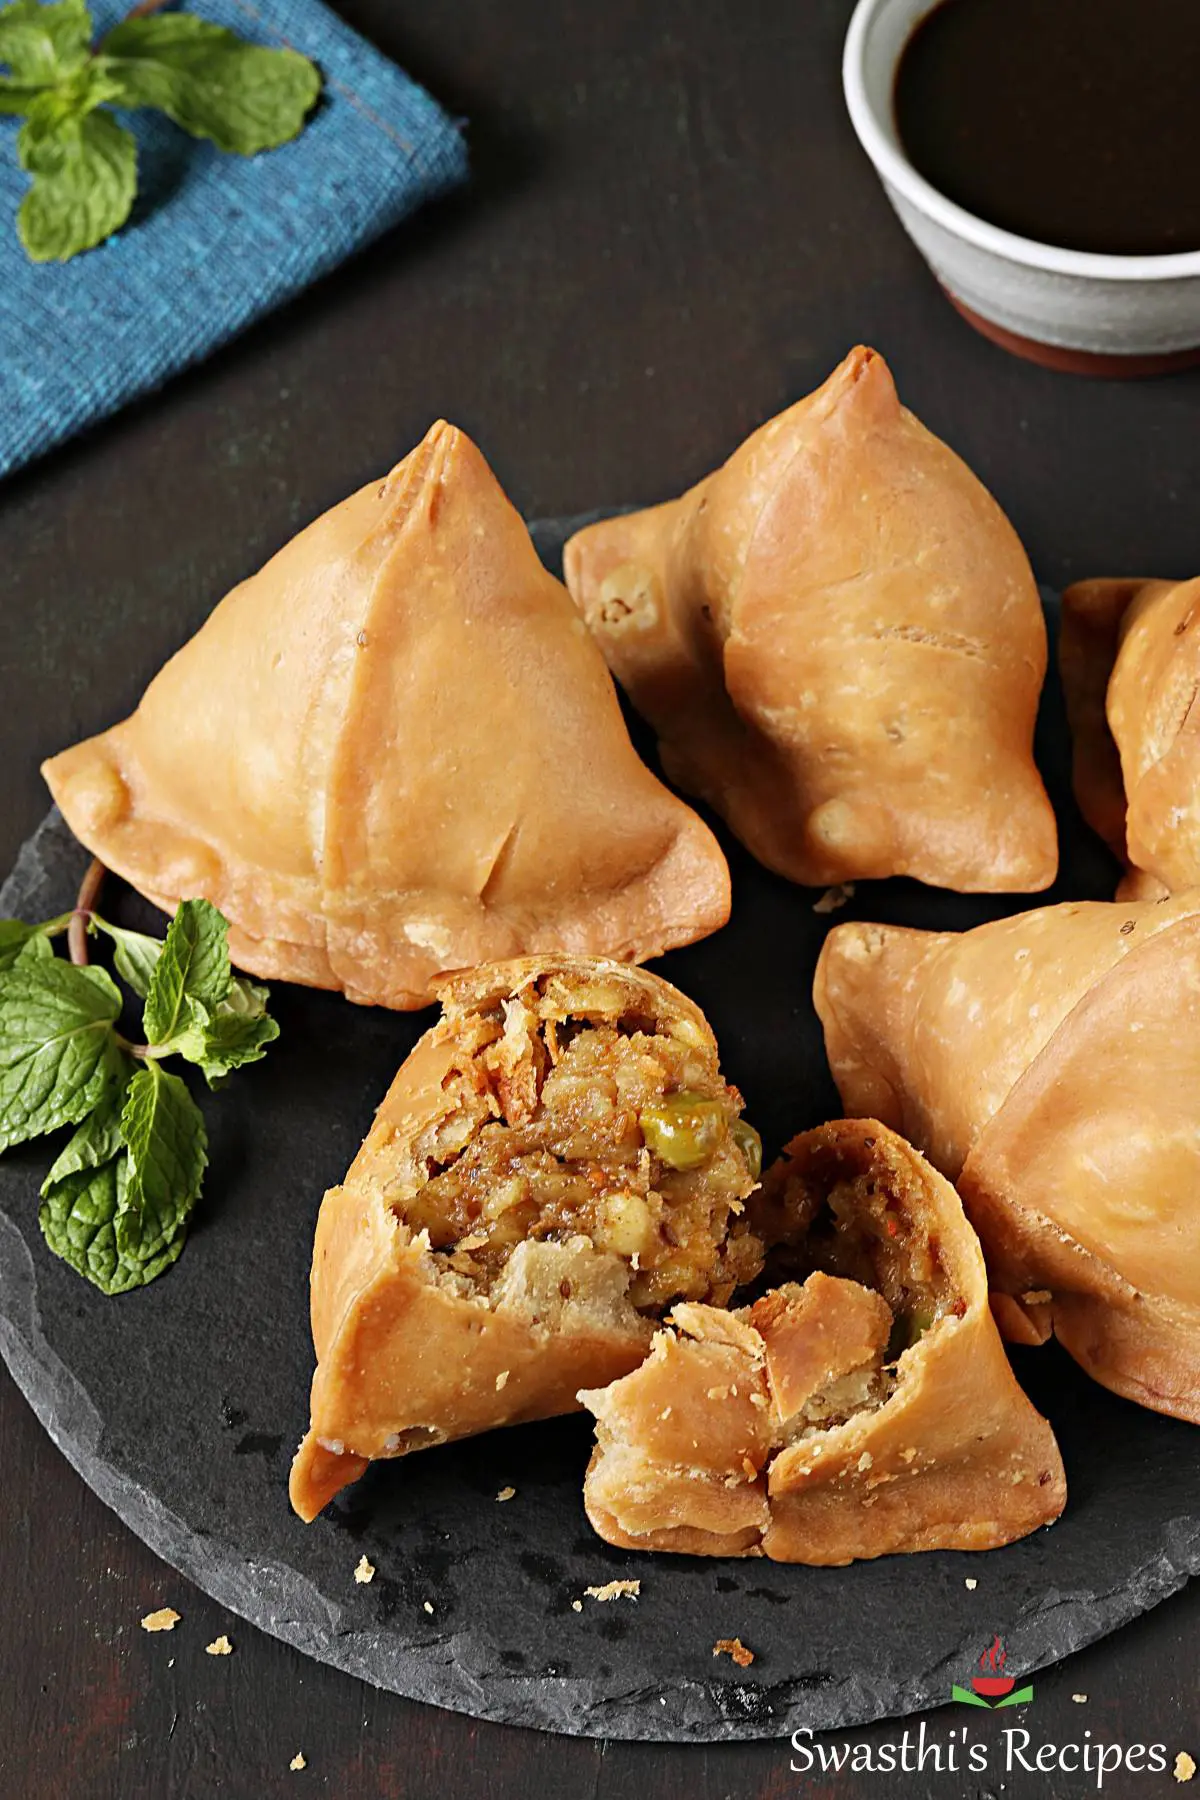 Flakey Samosa - Khasta Samosay' data-pin-description='Samosa is a popular Indian snack where spiced potatoes are stuffed in a flaky pastry and fried.